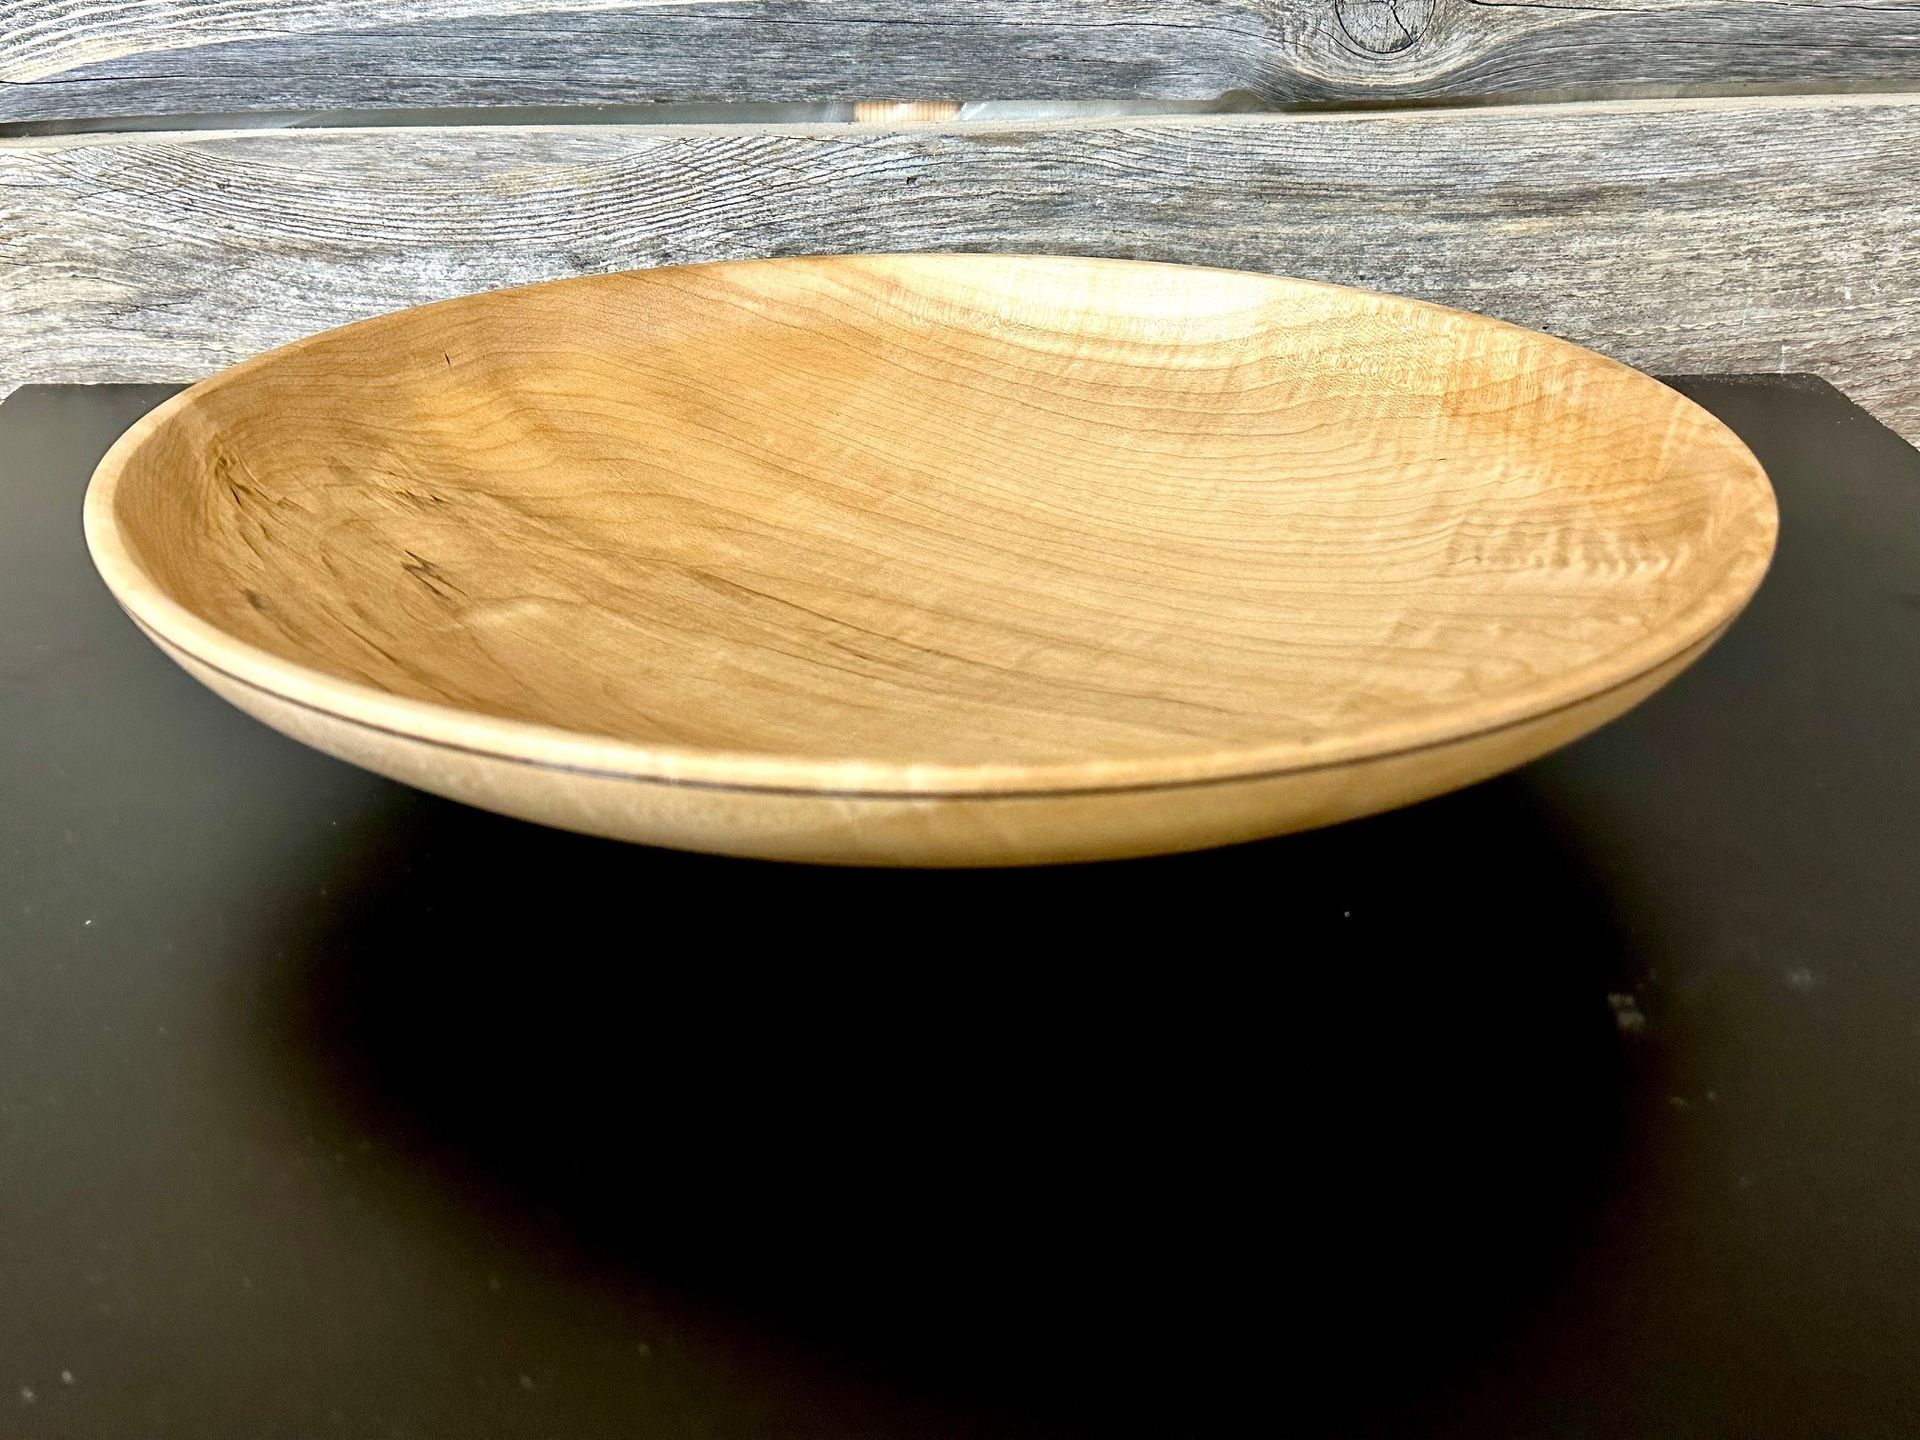 Curly Maple Handcrafted Fruit Wood Bowl.